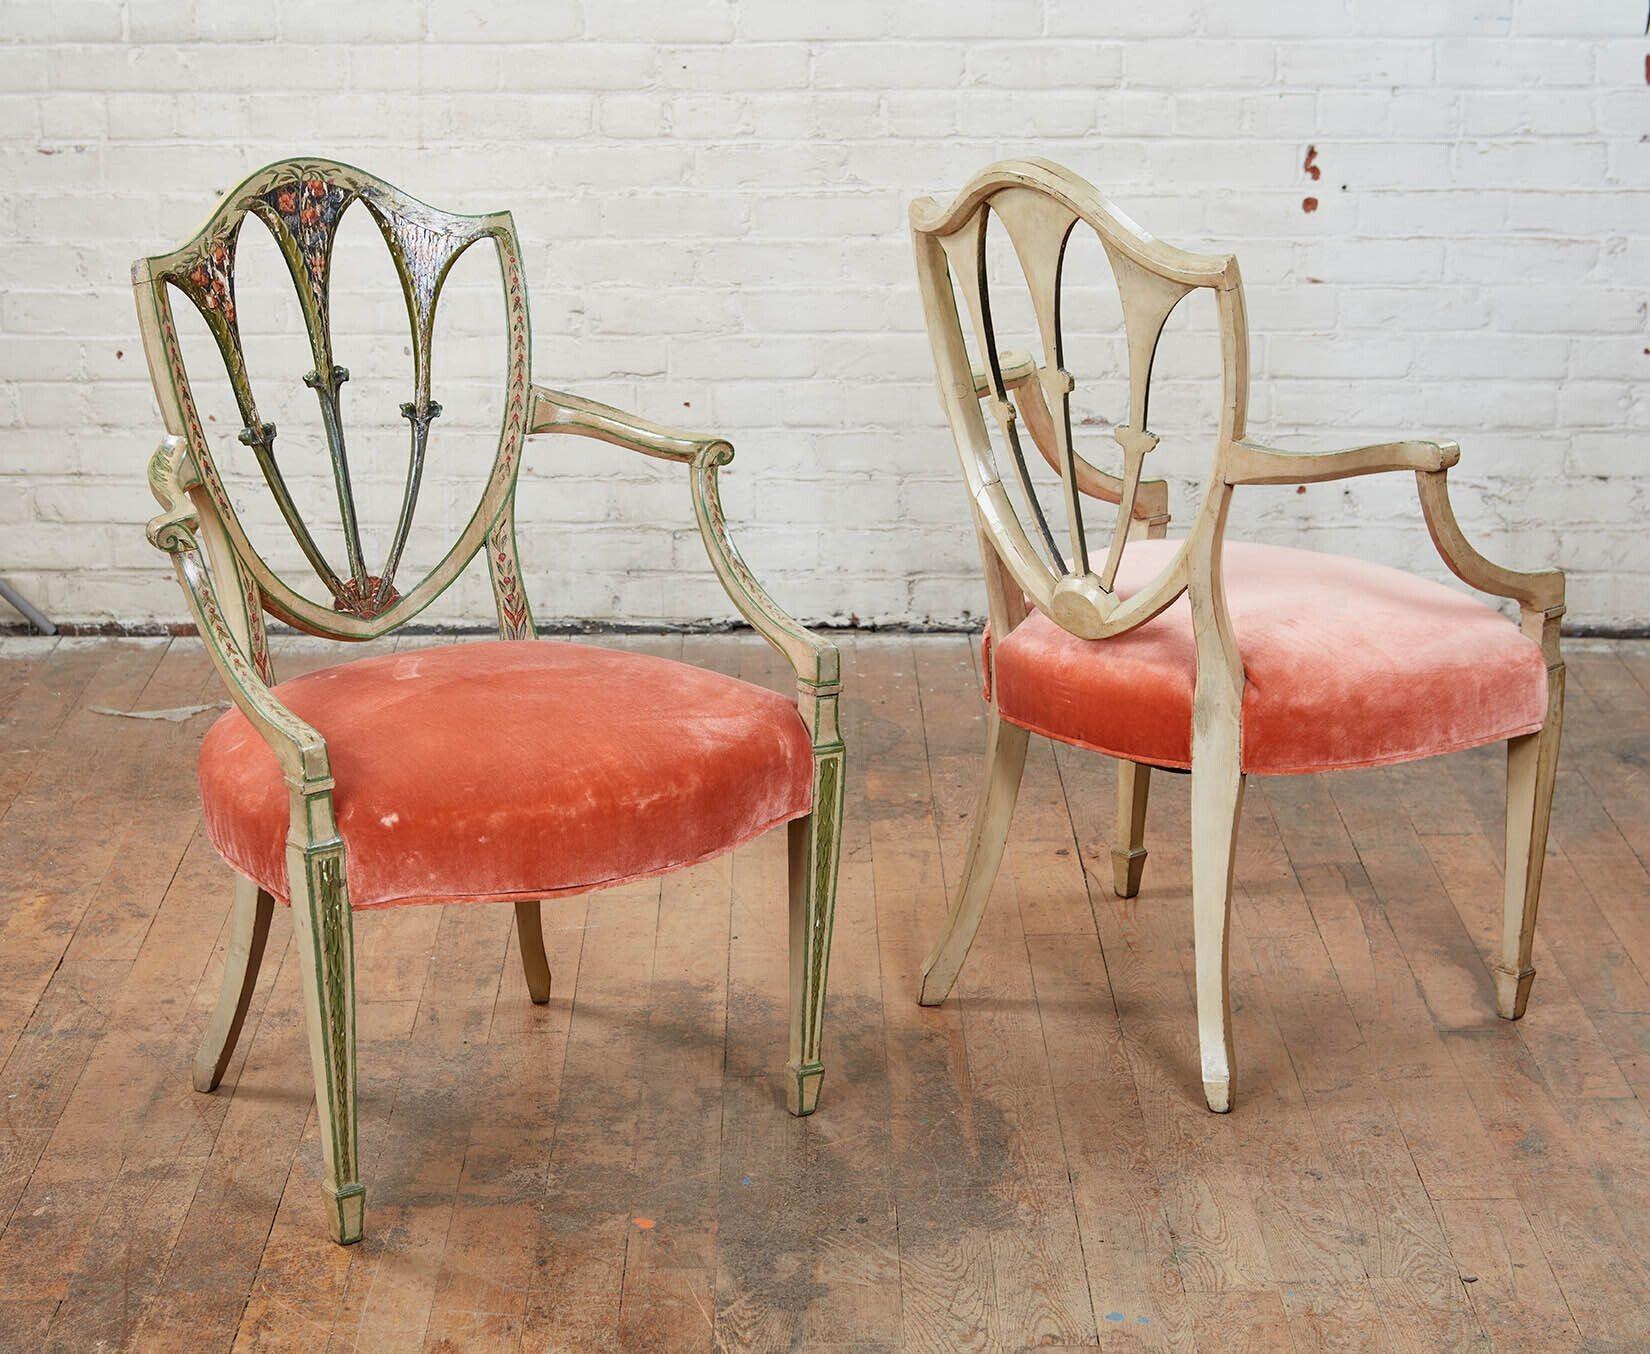 A pair of 18th century English Hepplewhite armchairs of generous scale with elegant proportions perfect for a bedroom, sitting room living room. Still retaining elements of their original hand painted decoration of garlands and rope. Seats in old